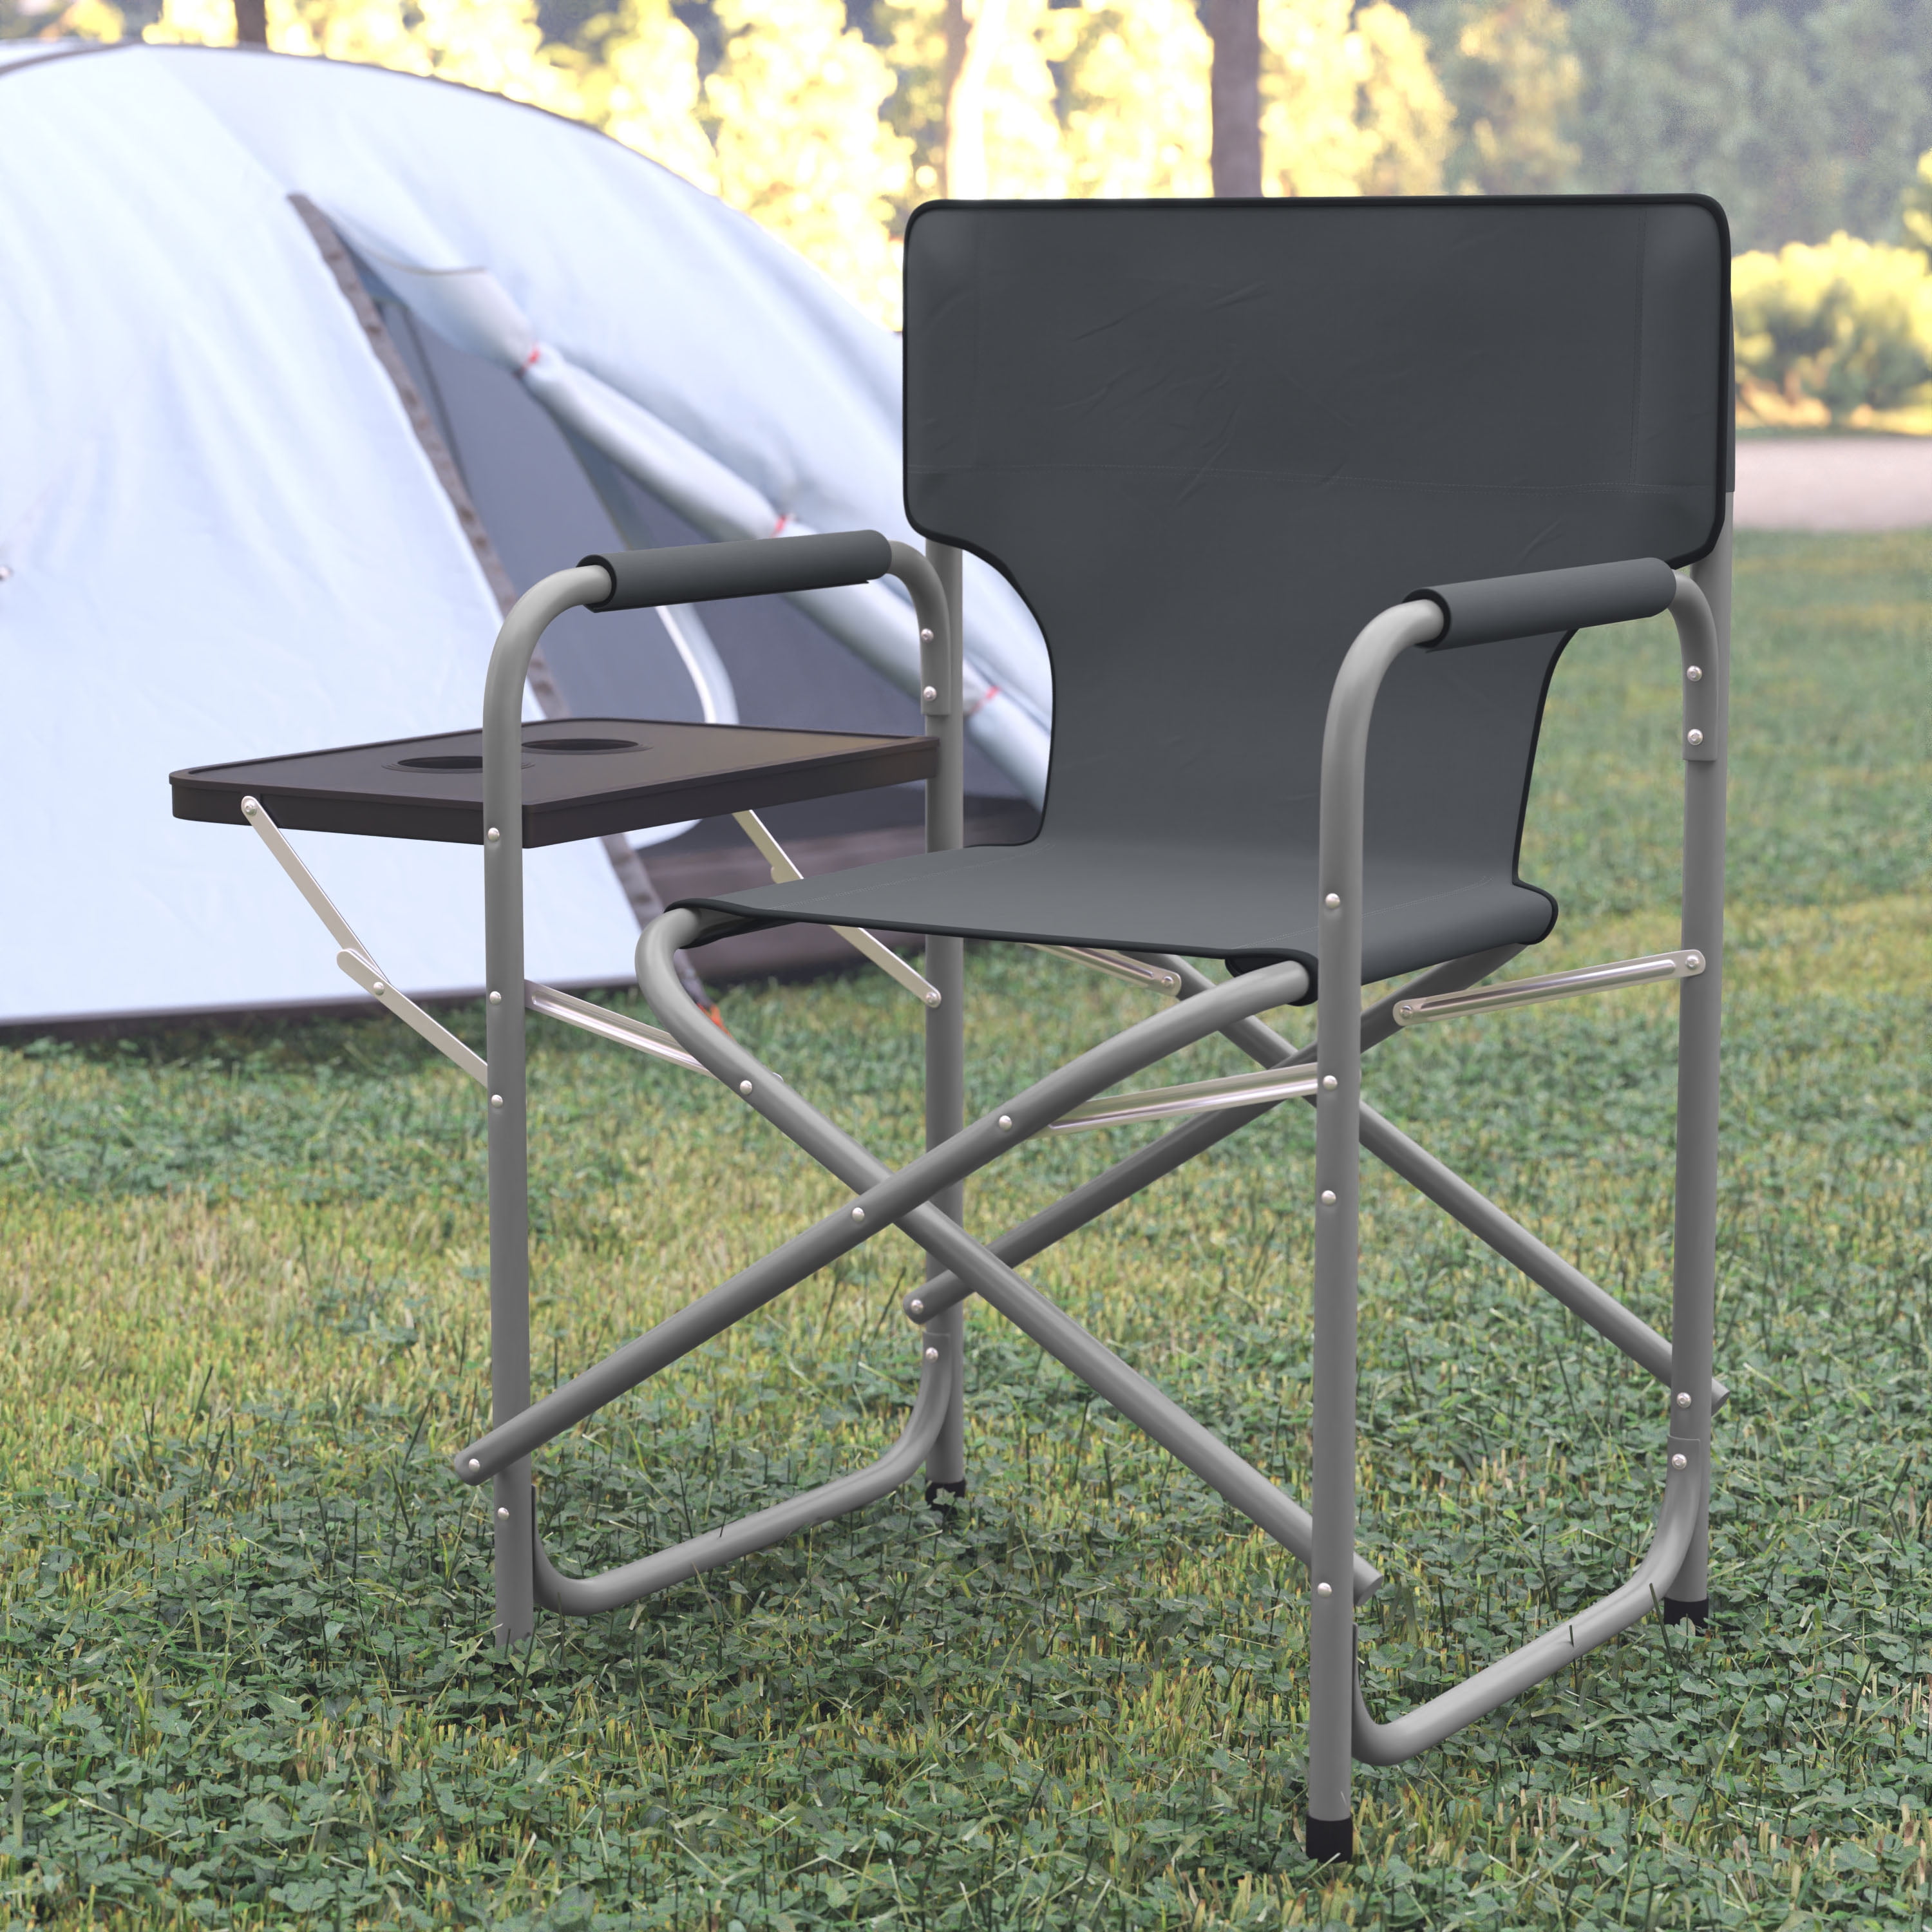 NEW ALUMINIUM FOLDABLE DIRECTORS CHAIR PICNIC TABLE GARDEN OUTDOOR CAMPING HOME 